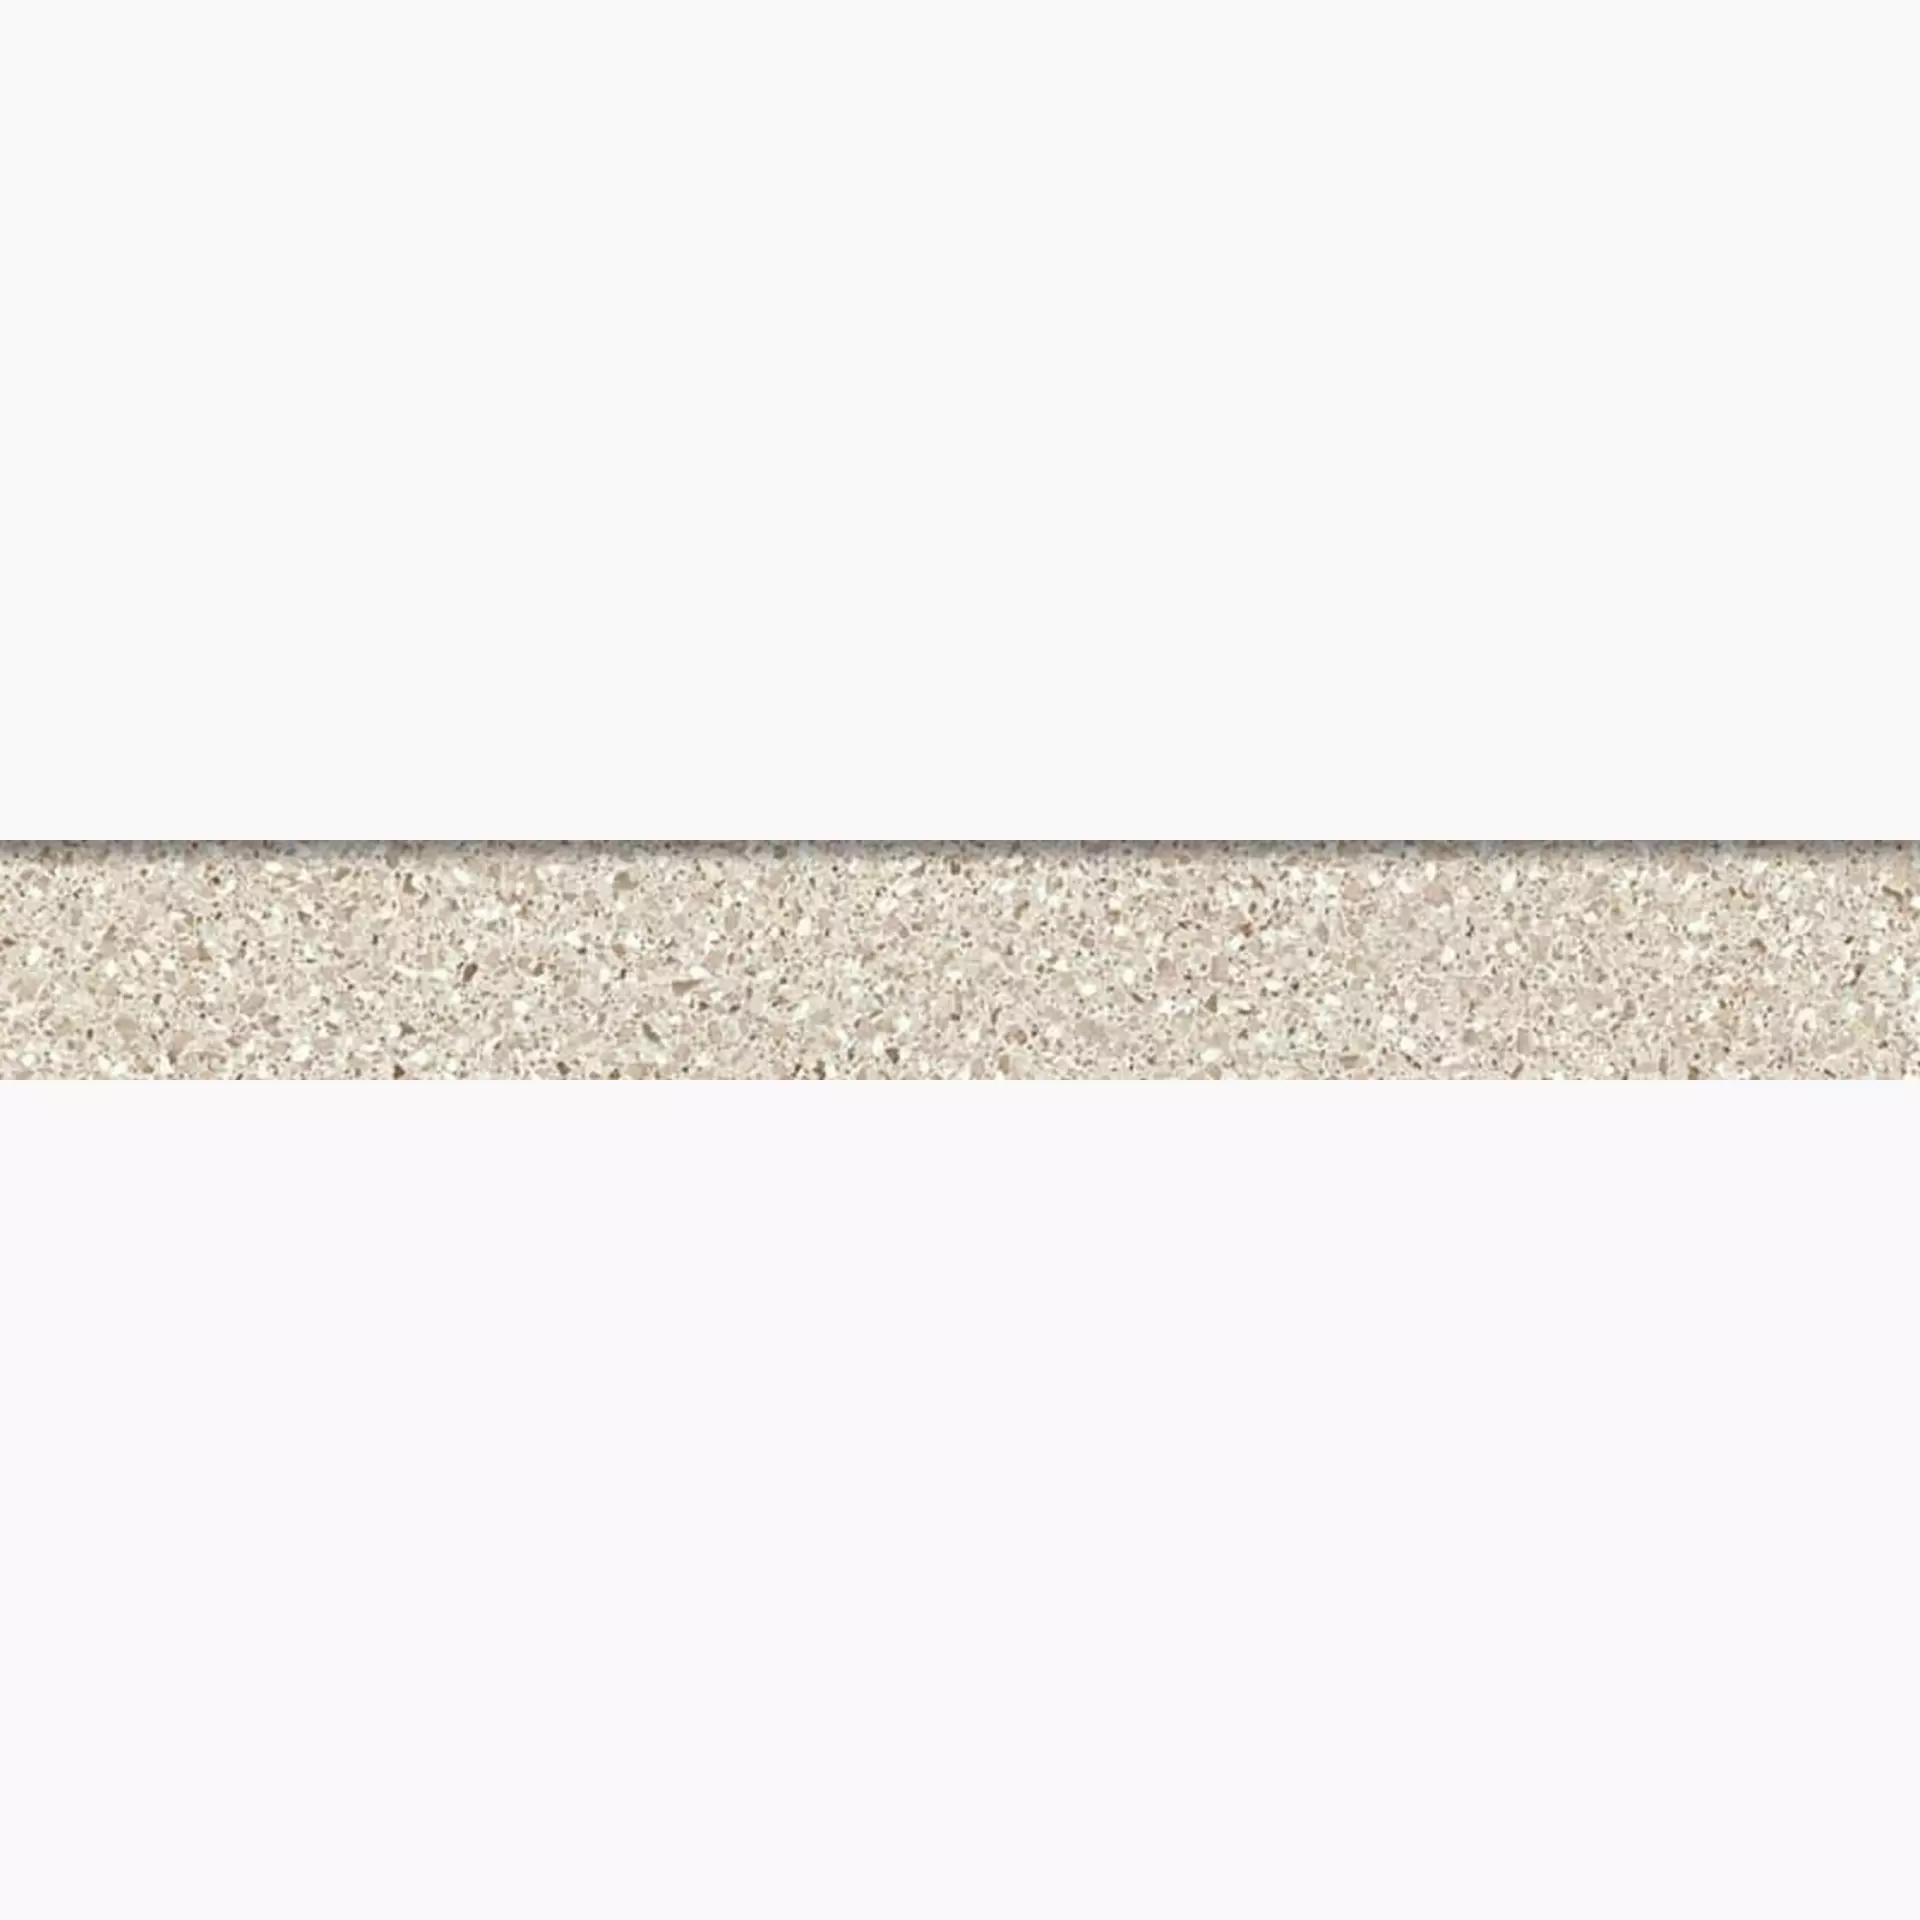 Sant Agostino Newdeco' Sand Levigato Skirting board CSABNDSL60 7,3x60cm rectified 10mm